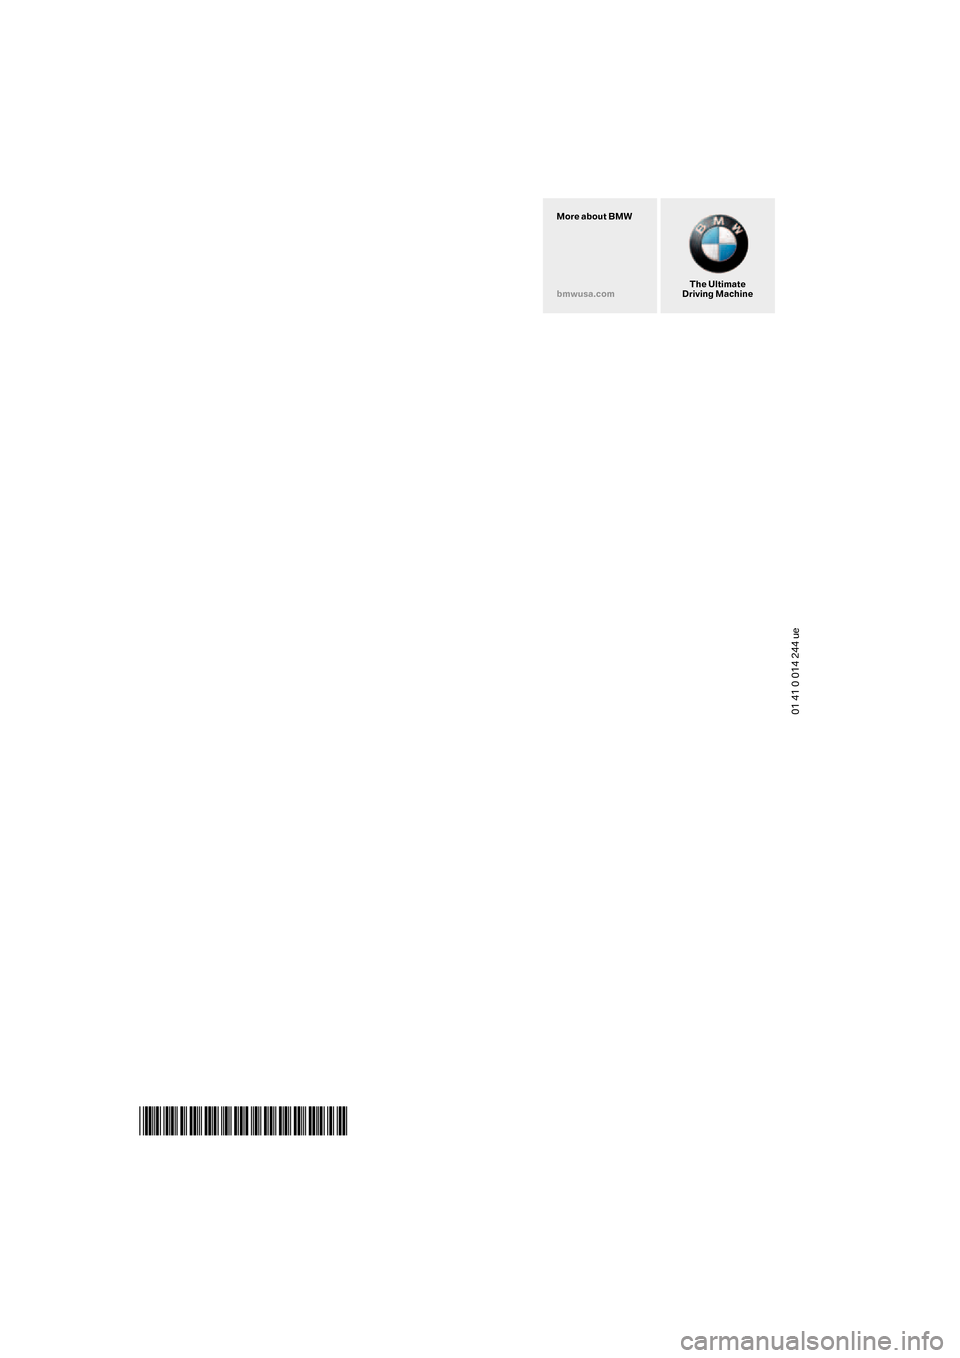 BMW M6 2008 E63 Owners Manual 01 41 0 014 244 ue
*BL001424400B*
The Ultimate
Driving Machine More about BMW
bmwusa.com 